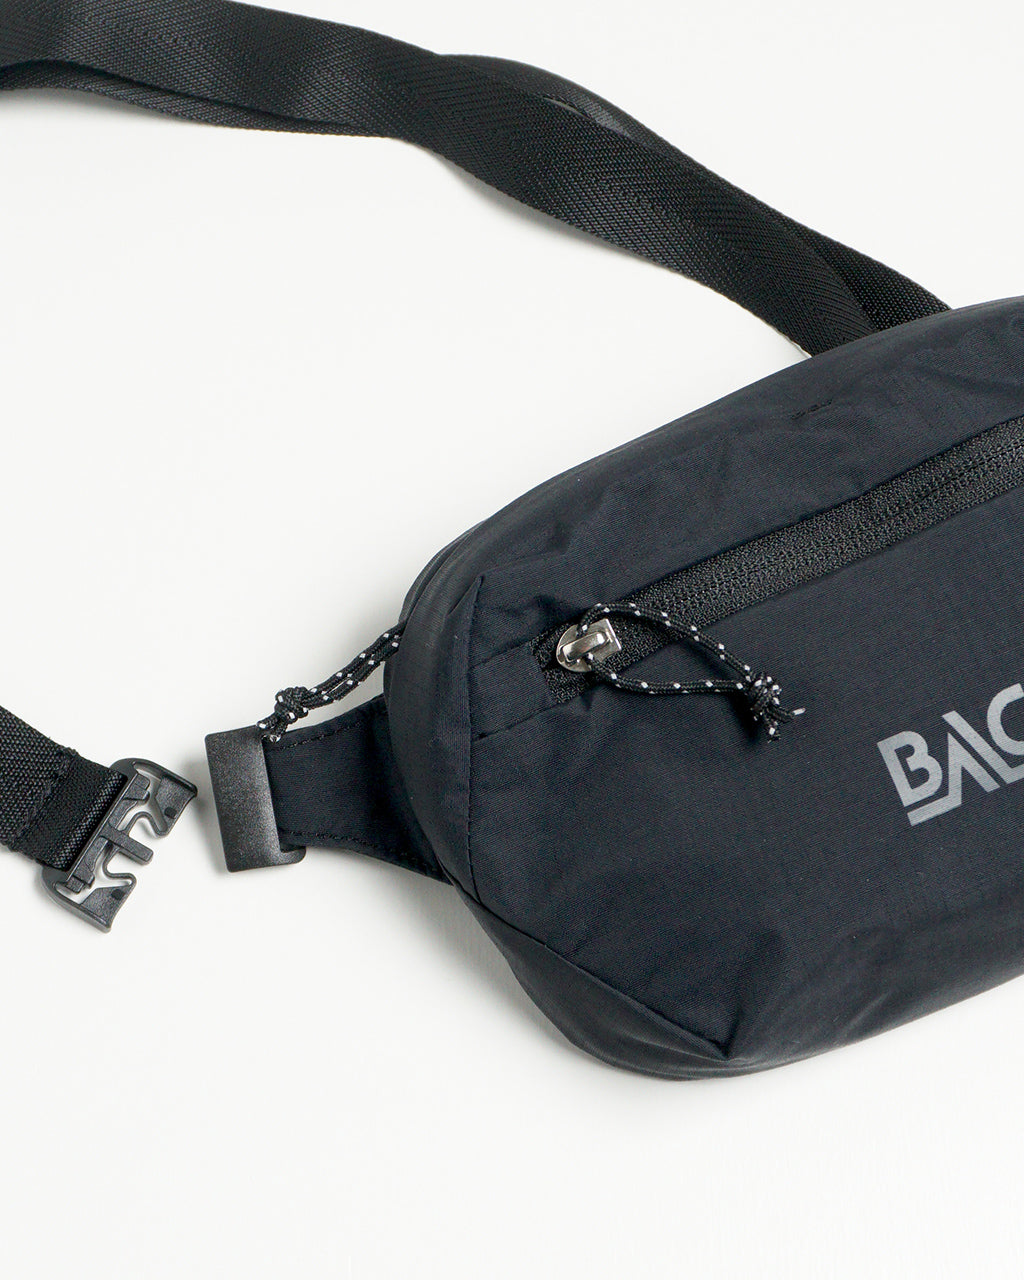 BACH バッハ 【3点セット】ITSY BITSY FAMILY BACKPACK SET, WALLET and POUCH_3pcs  バックパック リュック 20L ショルダーバッグ ポーチ 財布 ウォレット   24S-420986SET【送料無料】